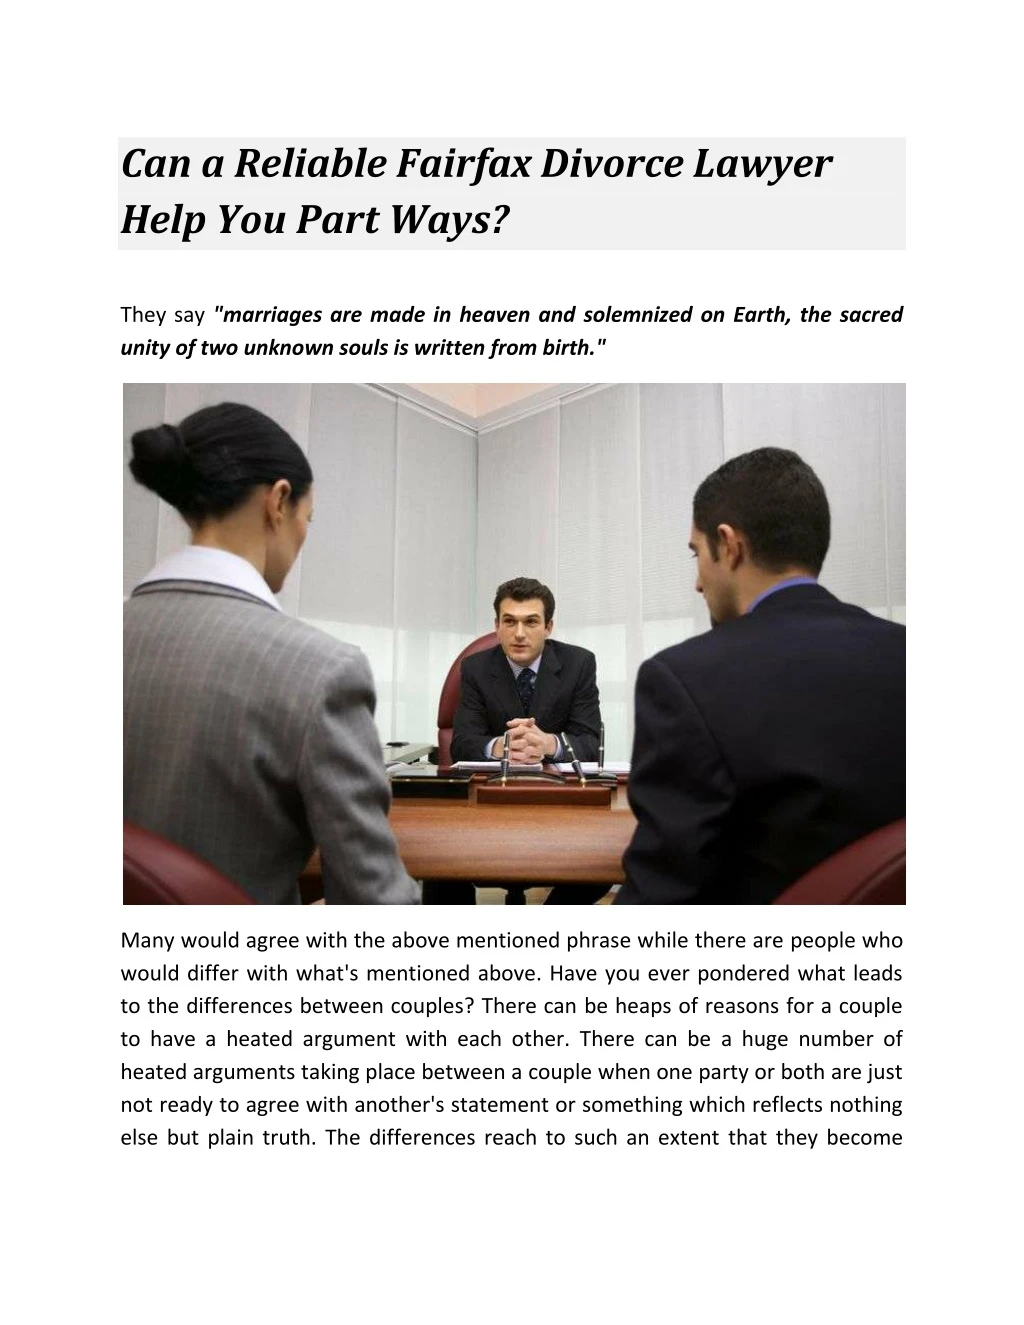 can a reliable fairfax divorce lawyer help